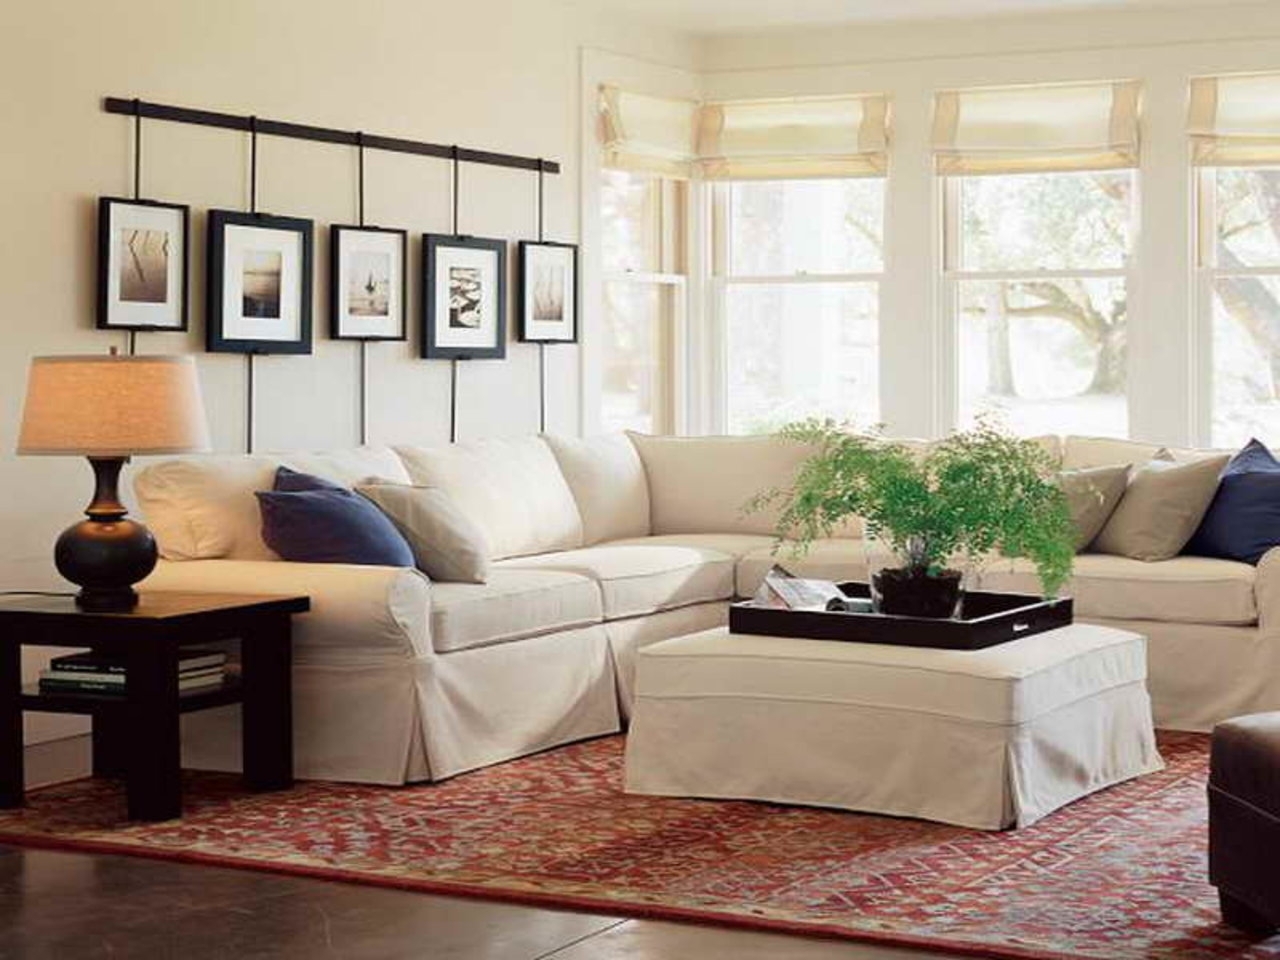 10 Ideal Pottery Barn Living Room Ideas %name 2022